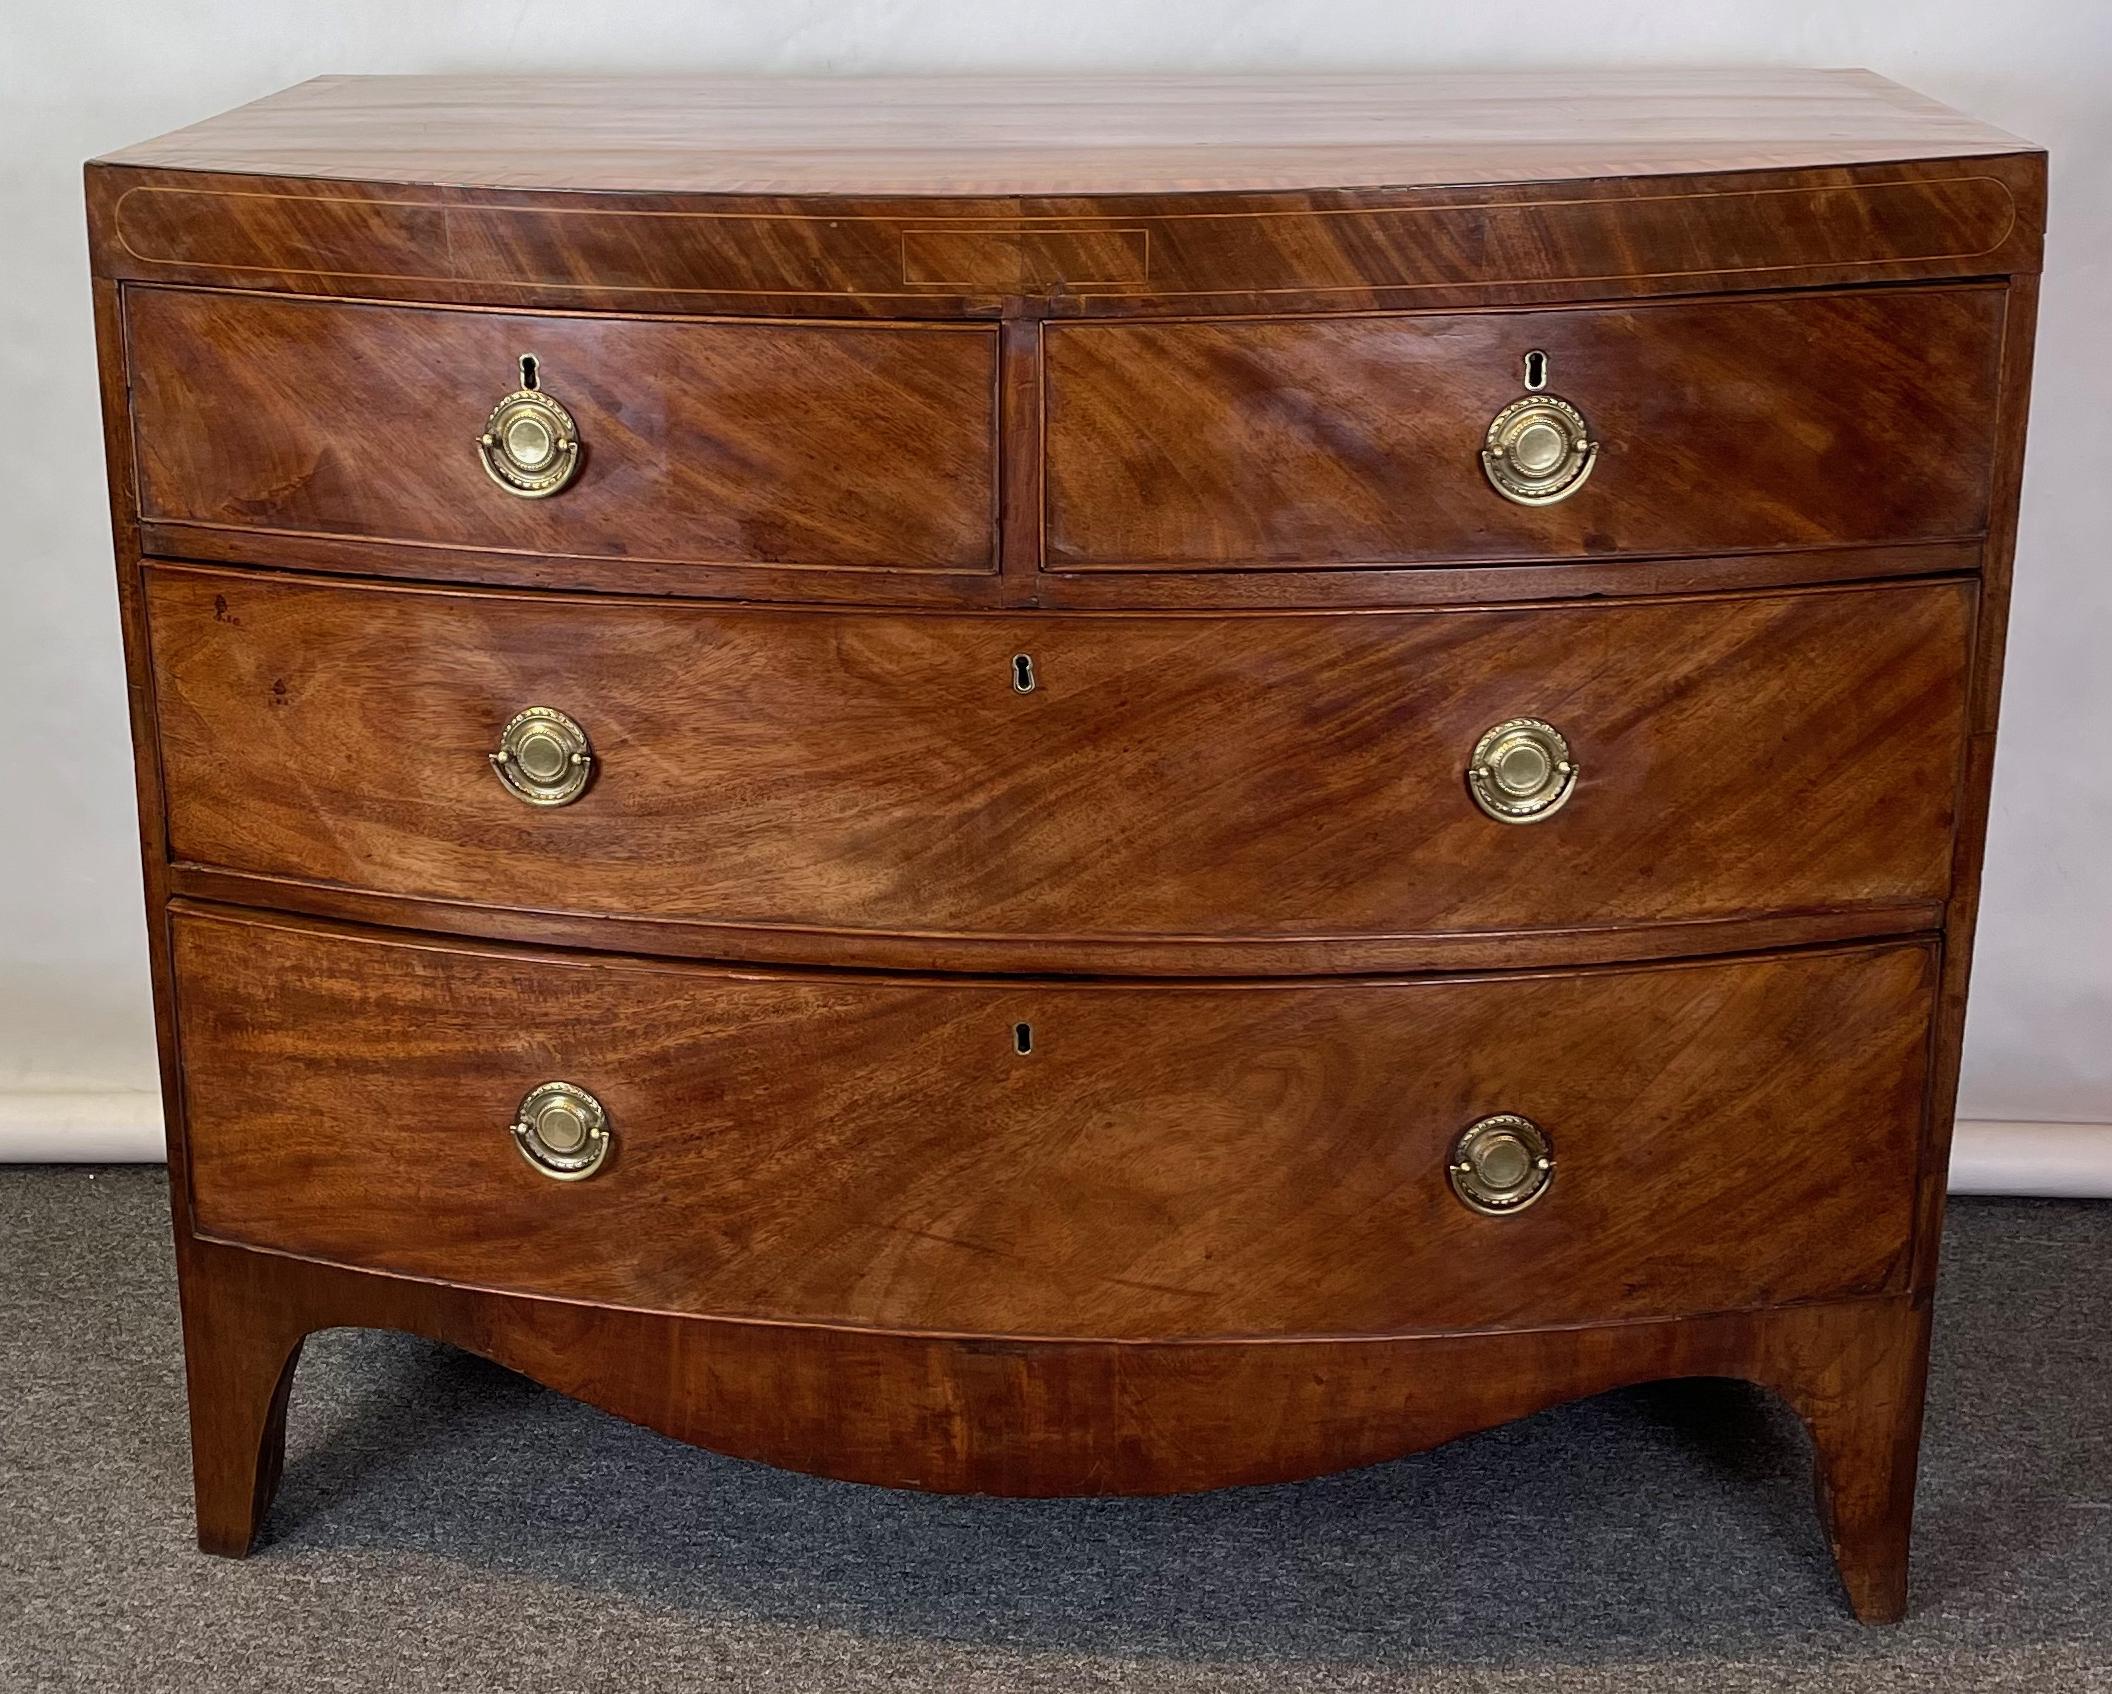 Hand-Crafted Early 19th Century English Bowfront Chest